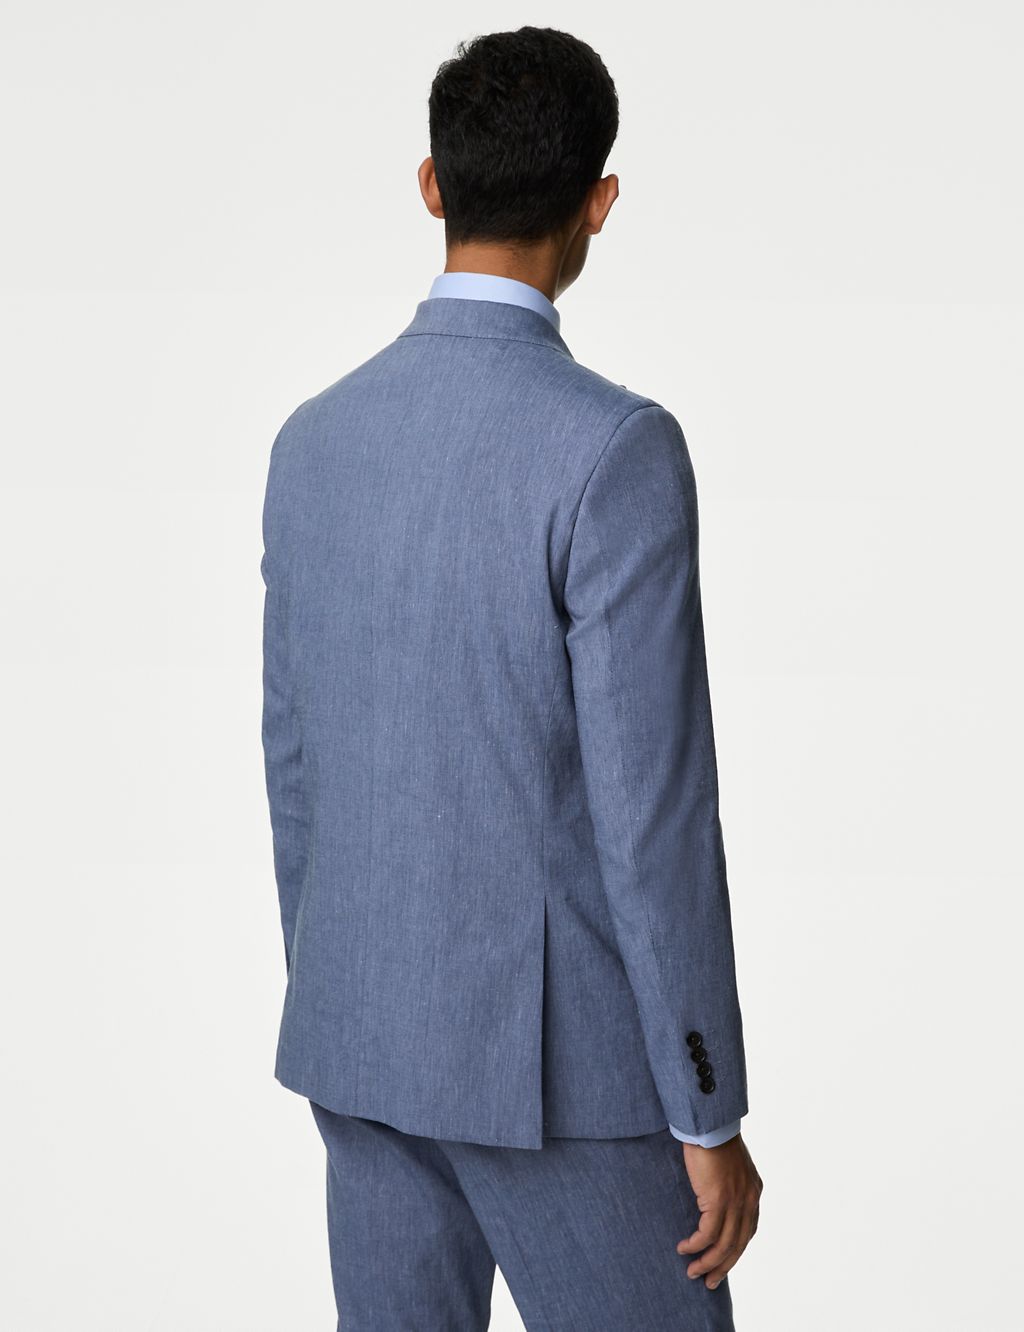 Tailored Fit Italian Linen Miracle™ Double Breasted Suit Jacket 5 of 8